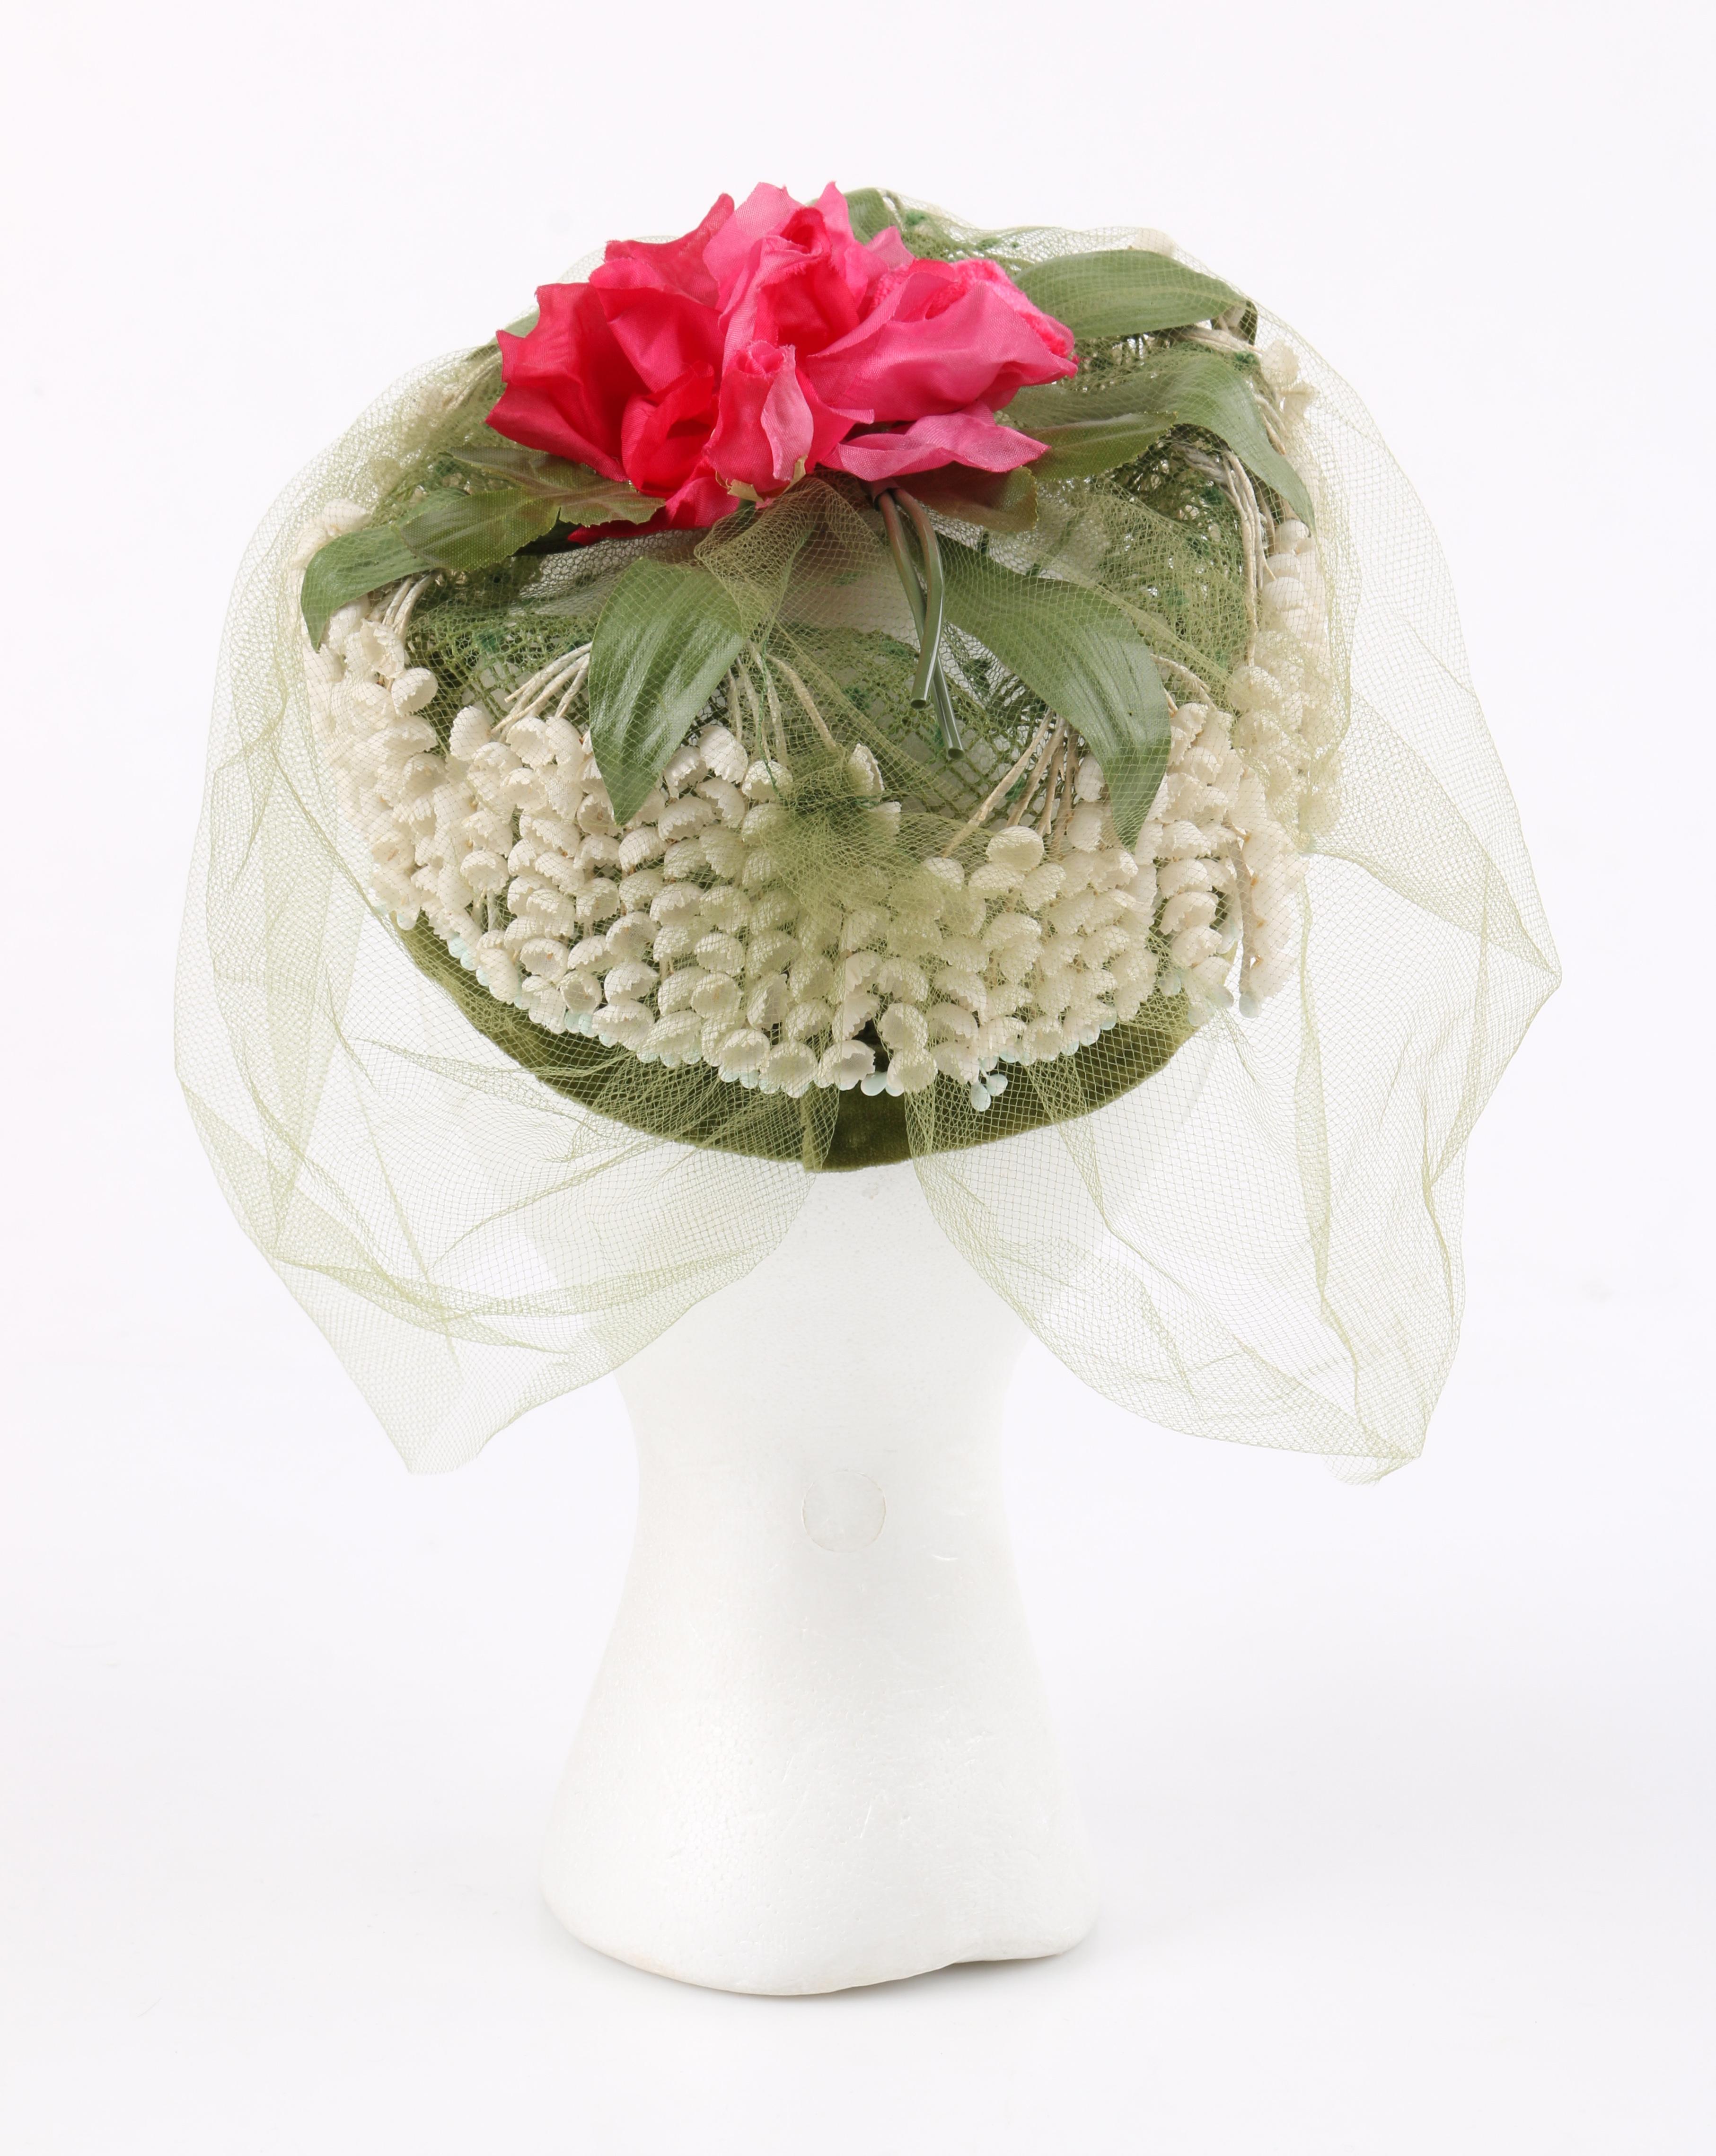 MISS FEIGE c.1960's Lily of the Valley Veiled Floral Garden Party Pillbox Hat 1